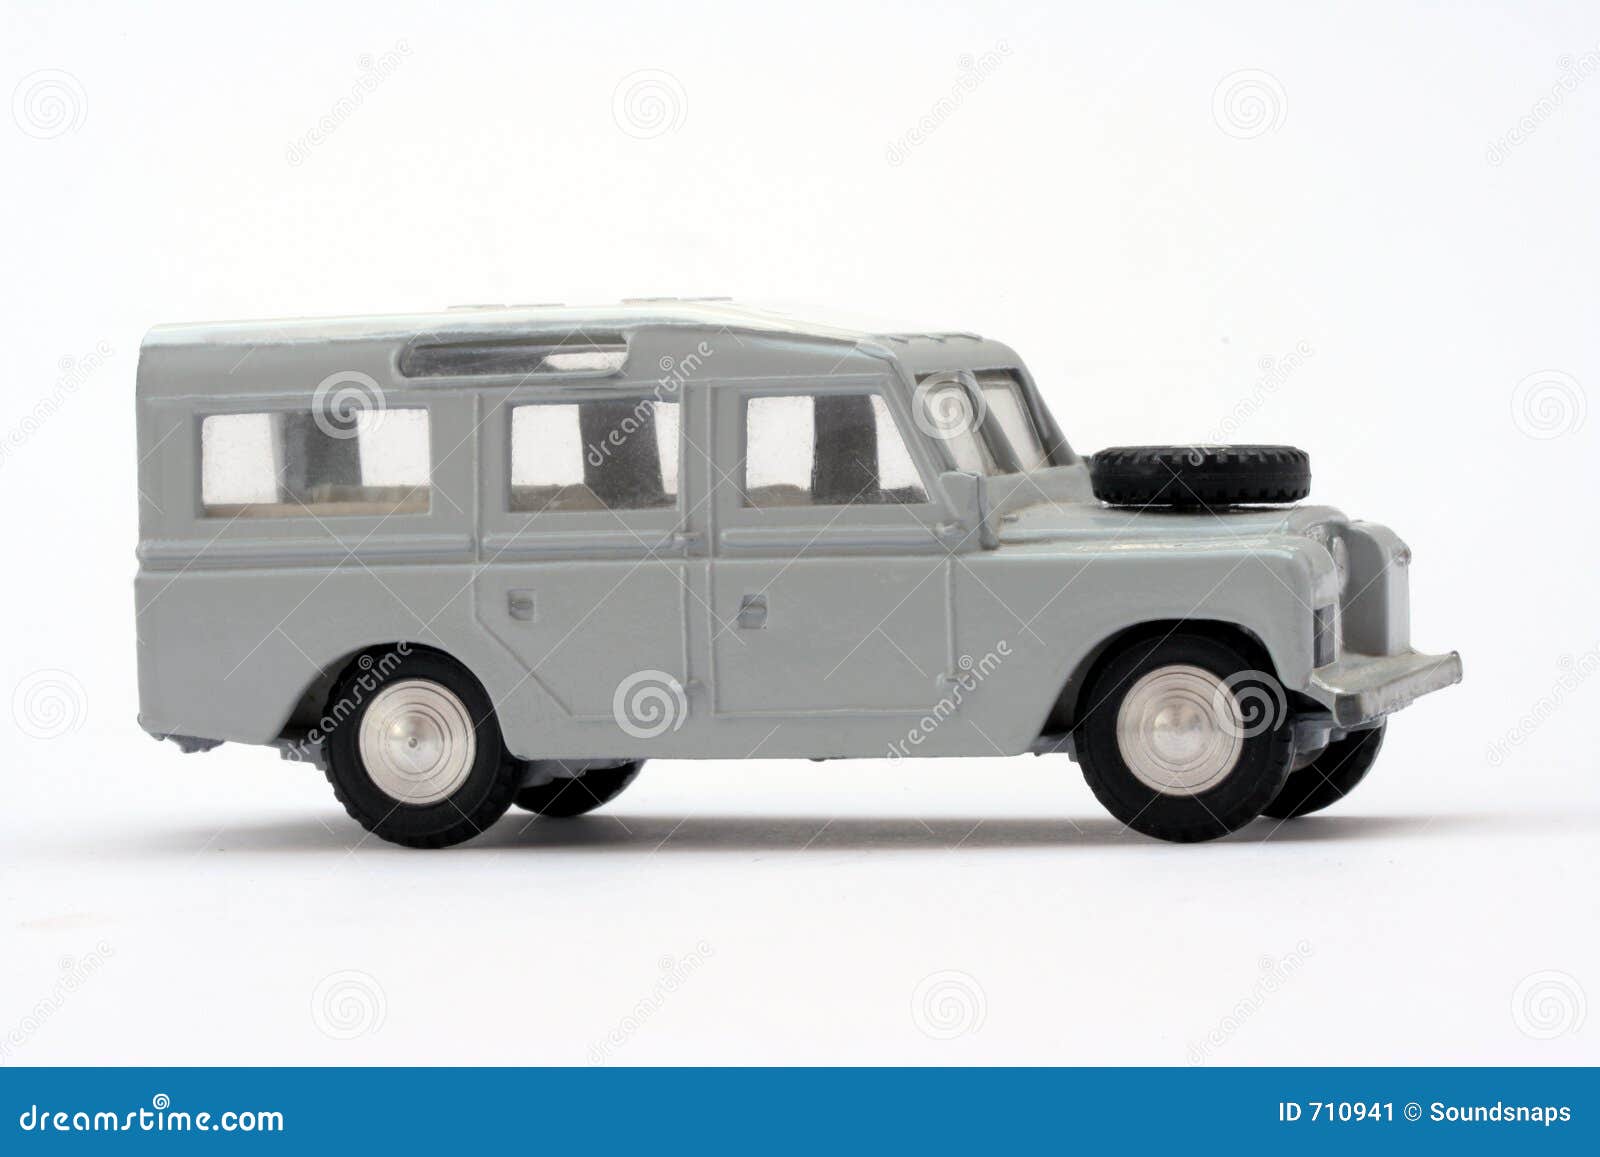 toy model landrover